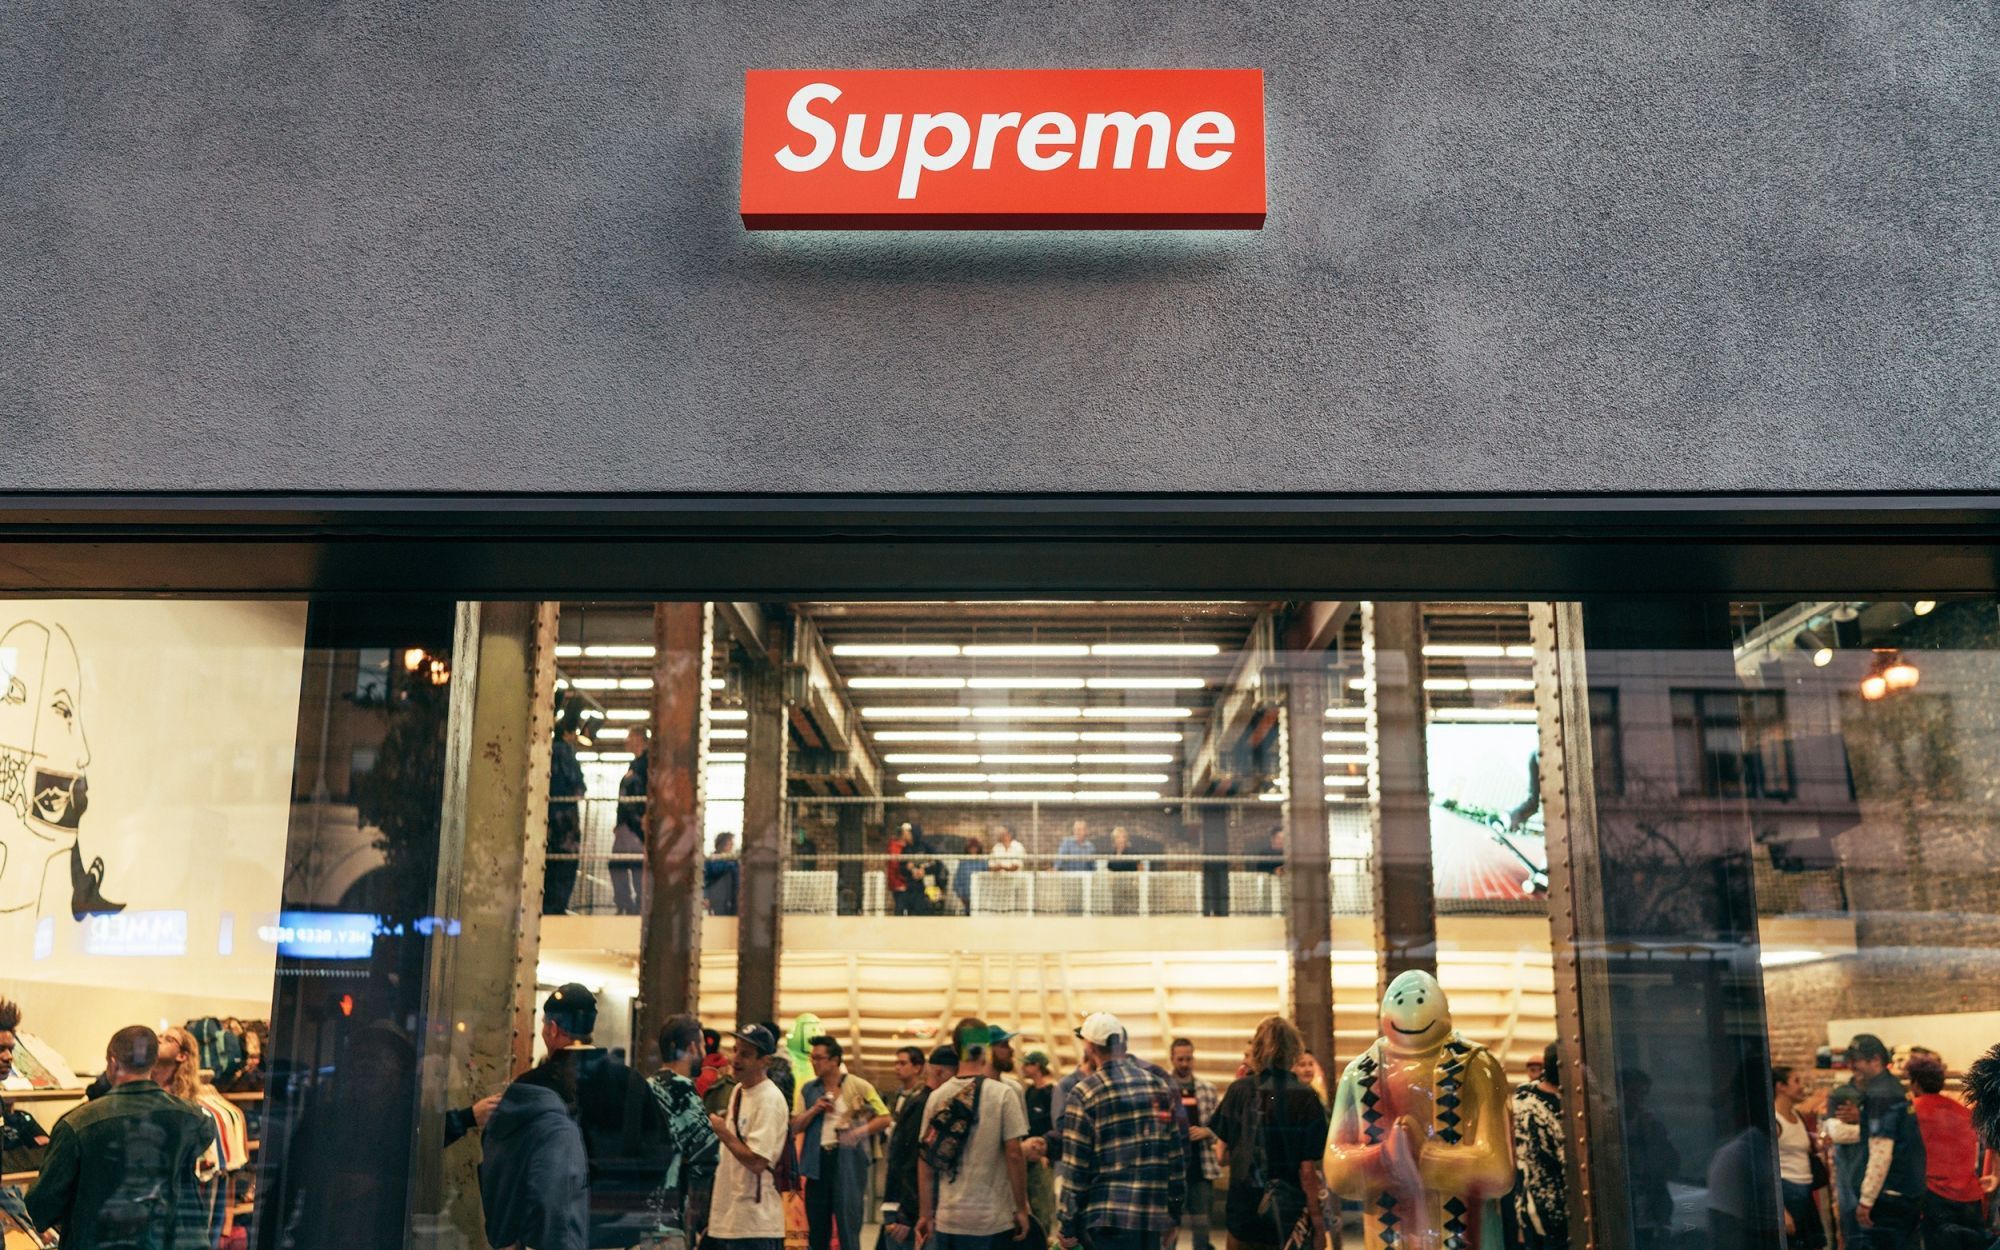 VF Buys Supreme for $2.1 Billion, Adds to Vans, Timberland, North Face